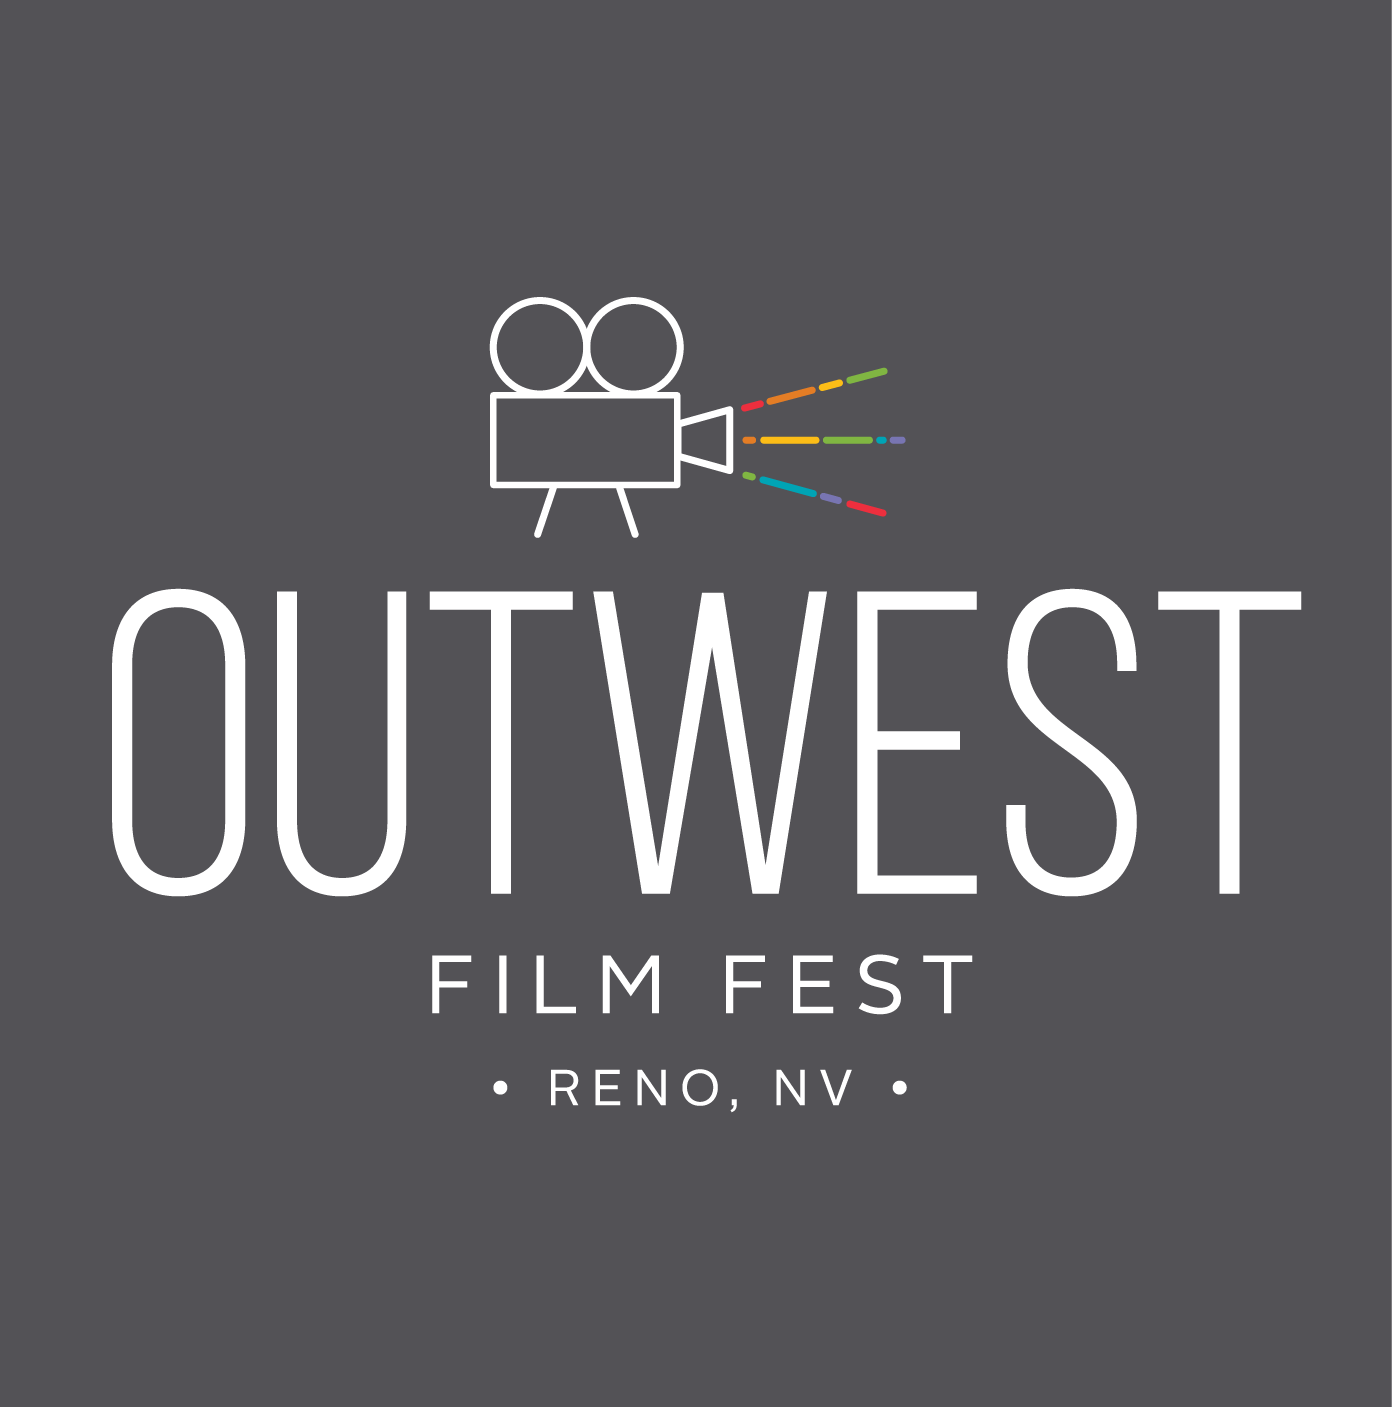 OutWest Film Fest Calls For LGBTQ-Themed Movie Submissions